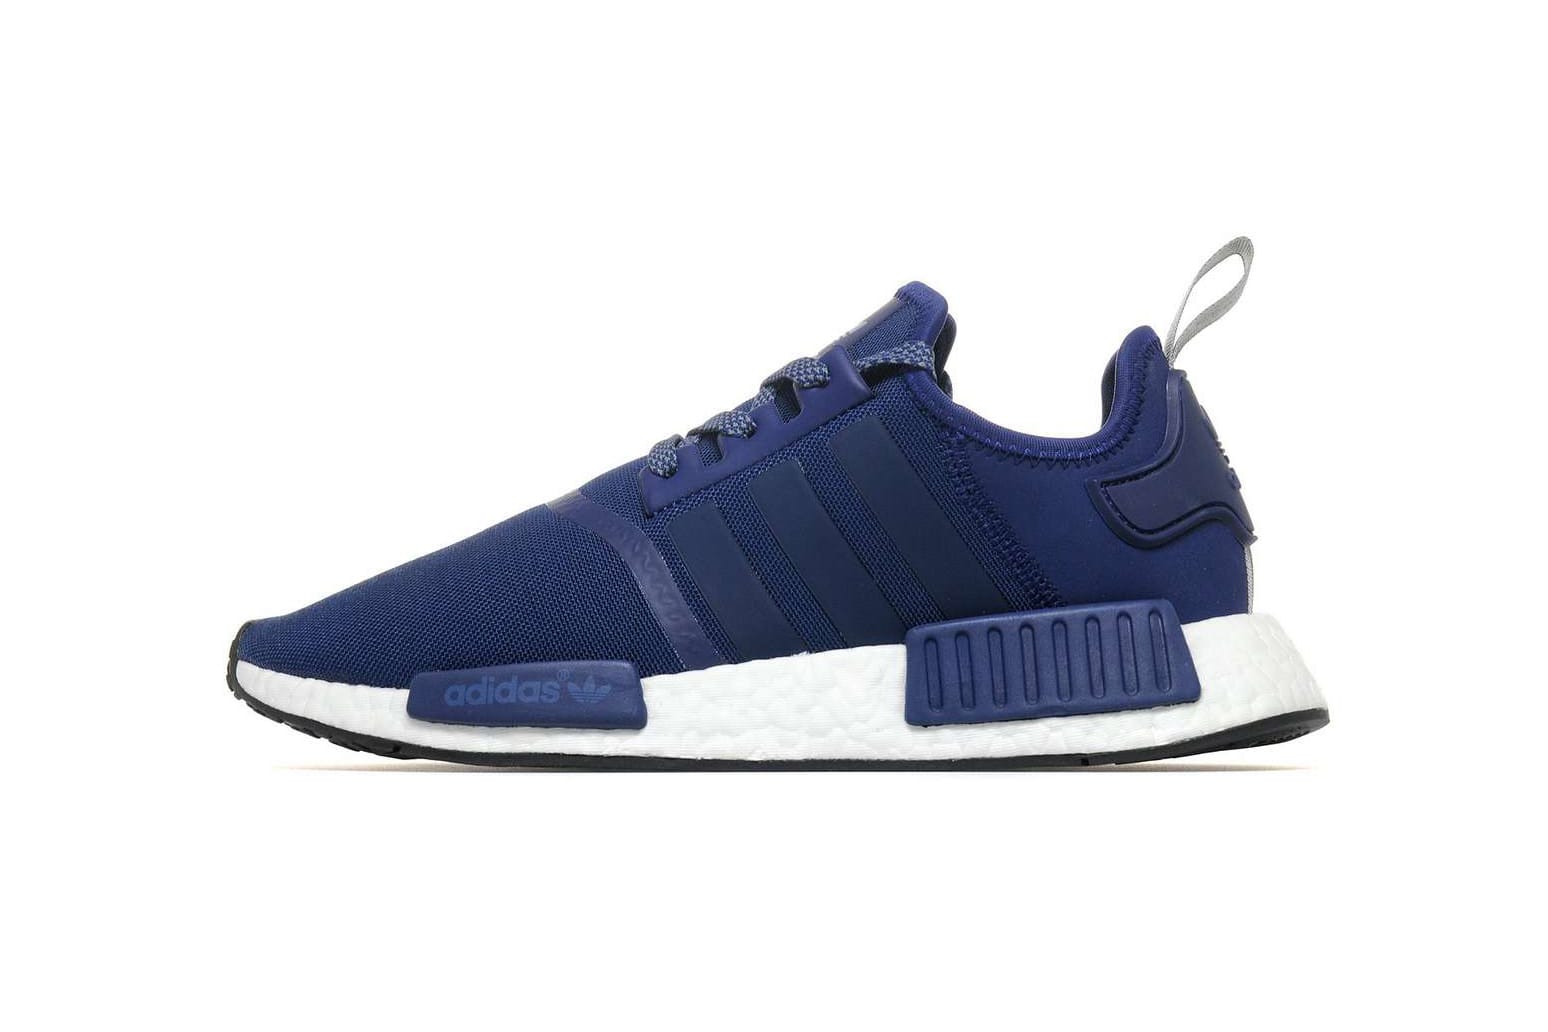 Nmd Adidas Blu E Rosse Top Sellers UP TO 63% OFF | www.rupit.com منمنات